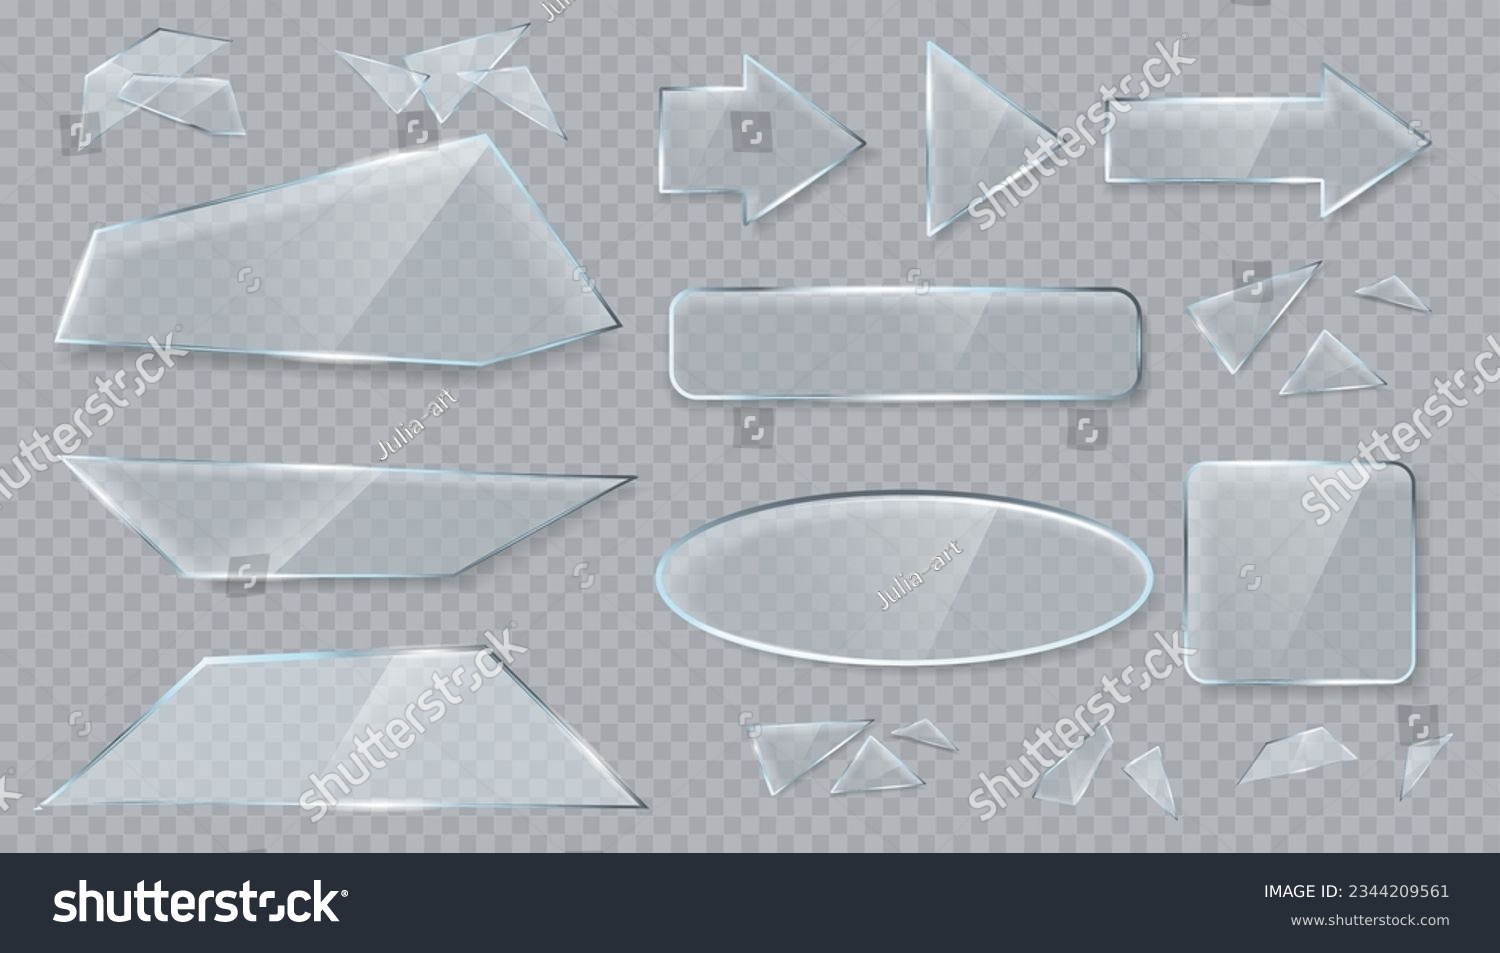 SVG of Vector transparent glass design elements for game and web. Arrows and objects.  Broken glass with sharp pieces svg